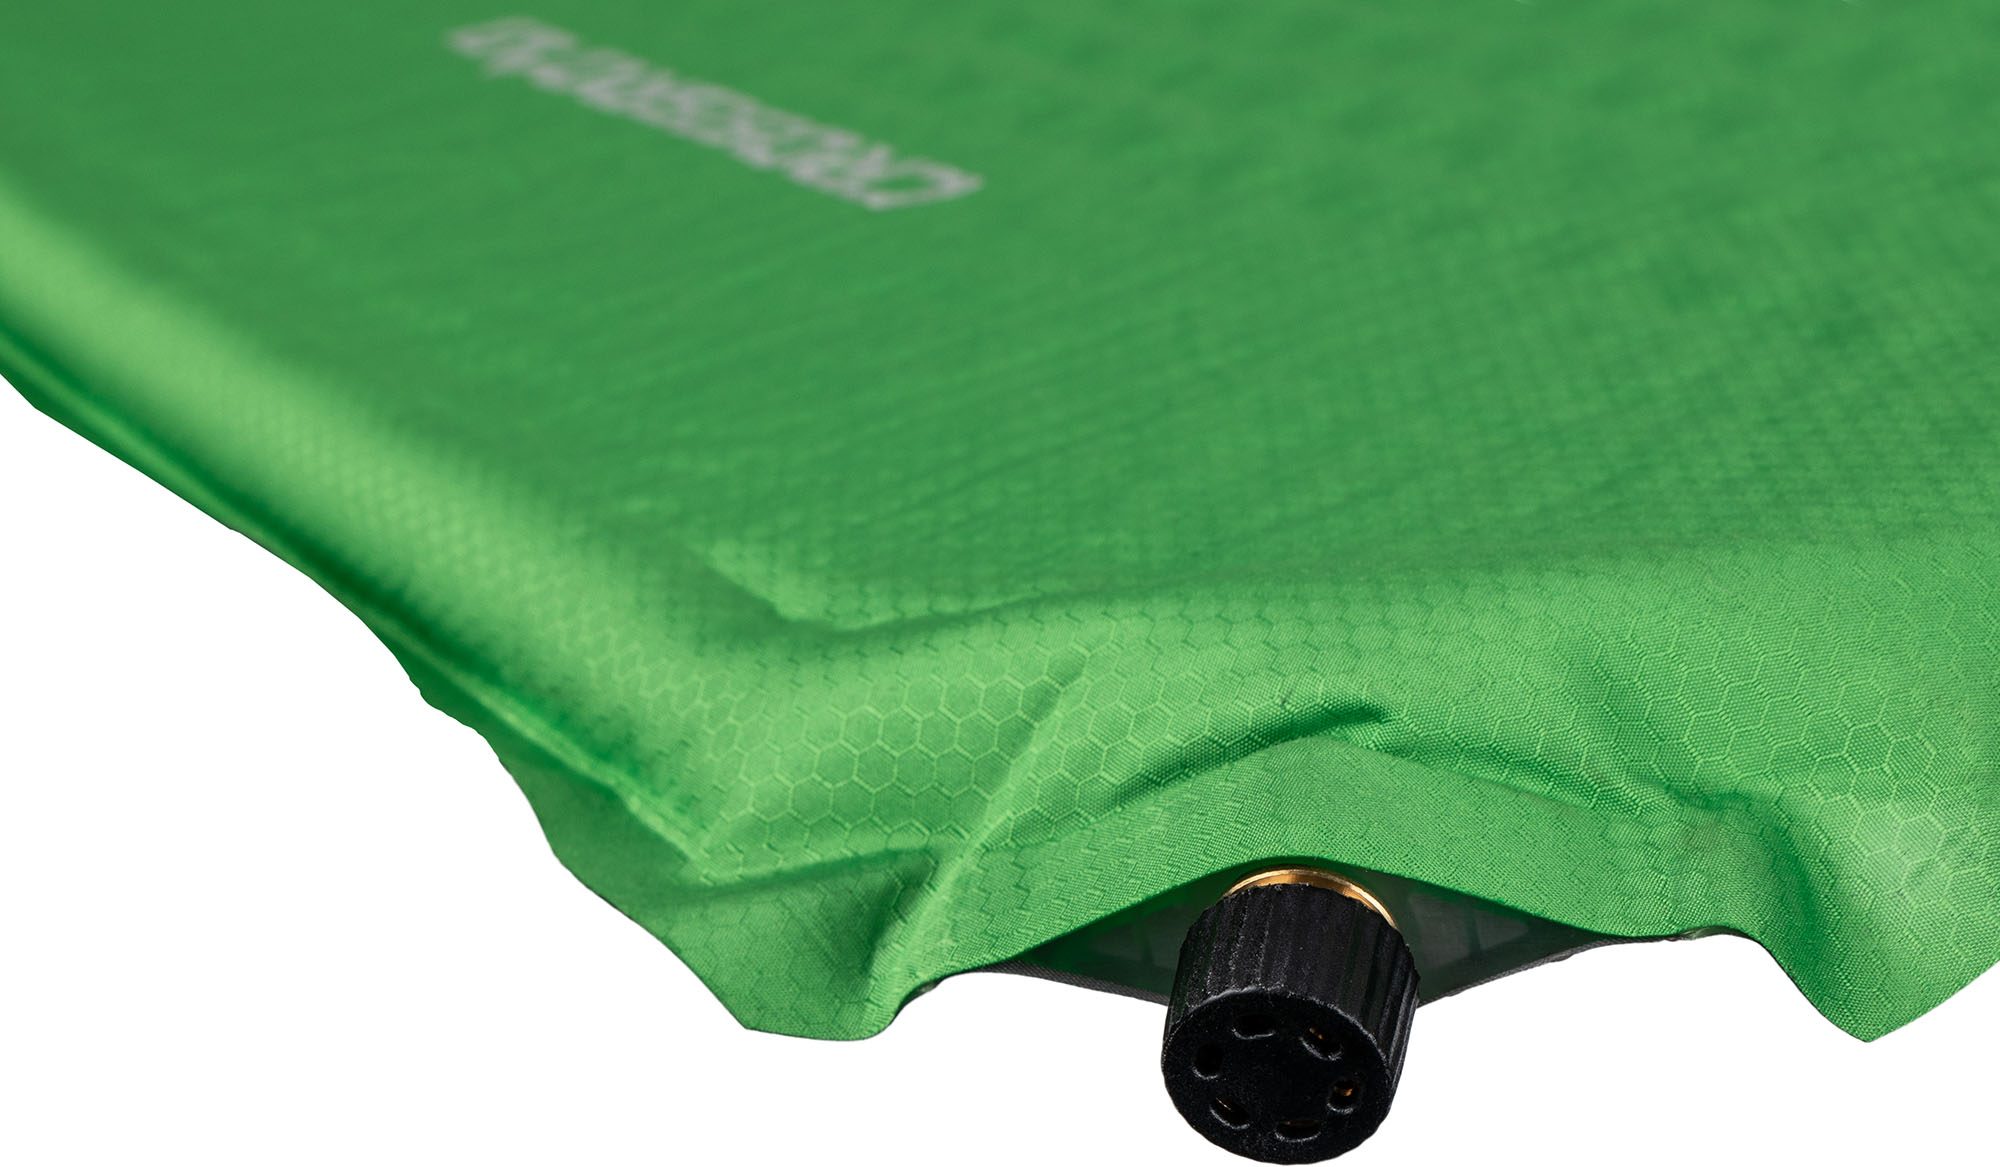 Self-inflating sleeping mat with anti-slip points